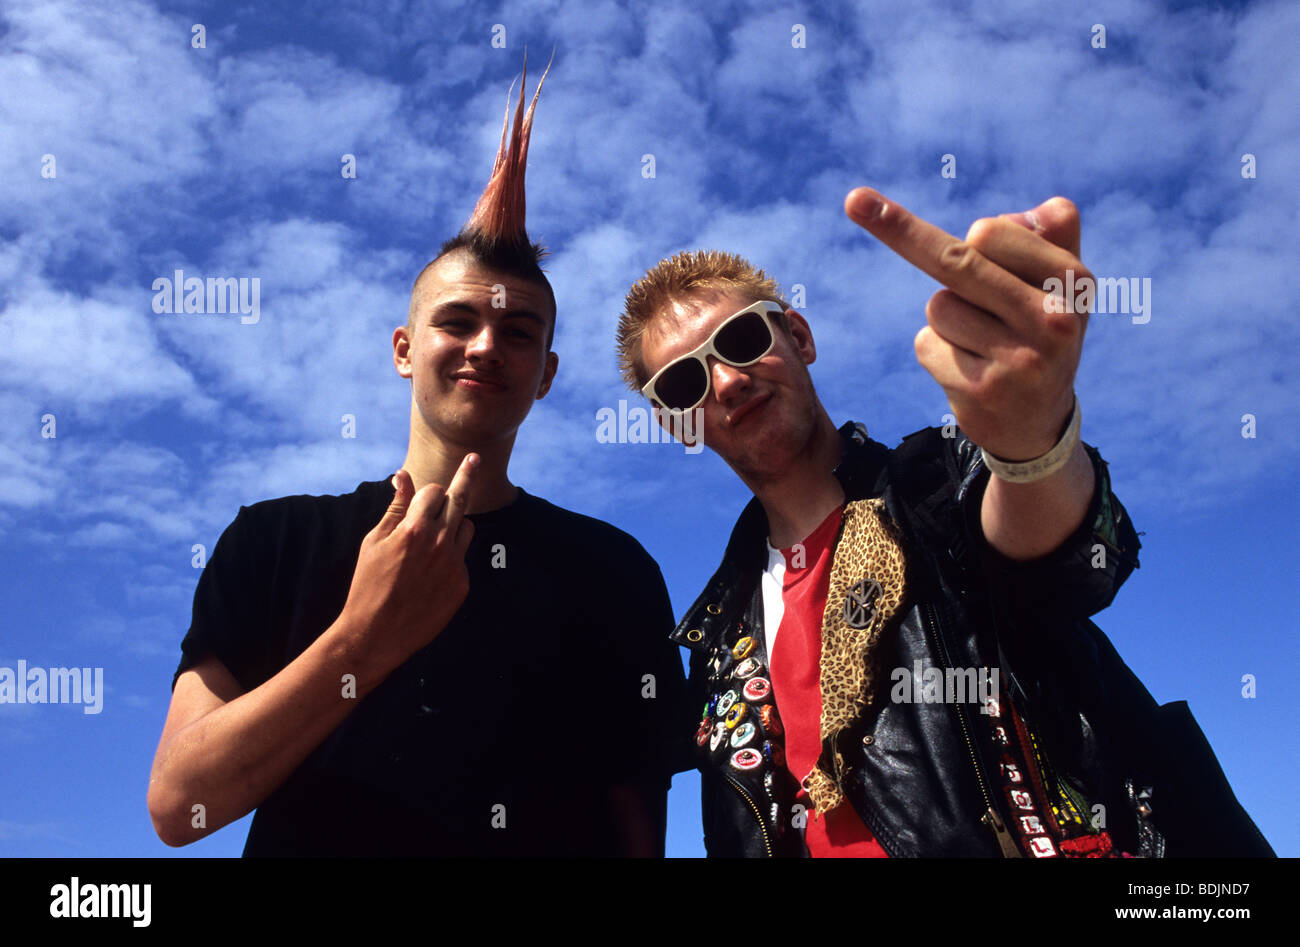 Two Punk Rockers Giving The Finger During The Annual Rebellion Festival At Blackpool Stock Photo